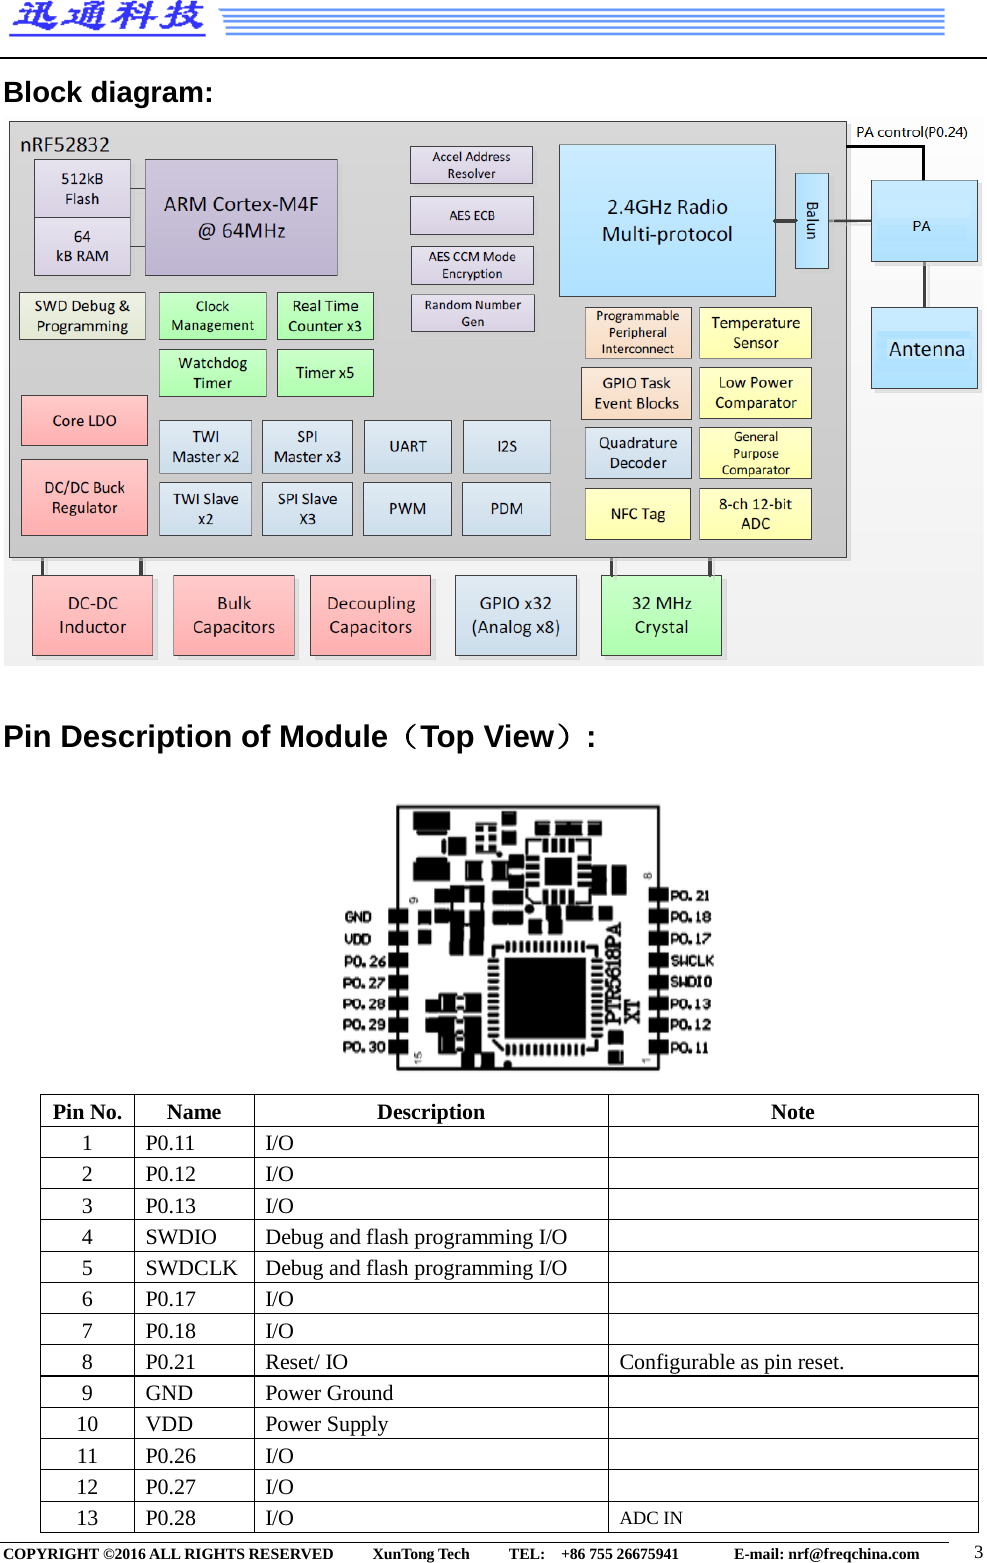  Block diagram:    Pin Description of Module（Top View）:           Pin No. Name Description Note 1 P0.11 I/O  2 P0.12 I/O  3 P0.13 I/O  4 SWDIO Debug and flash programming I/O  5 SWDCLK Debug and flash programming I/O  6 P0.17 I/O  7 P0.18   I/O  8 P0.21 Reset/ IO Configurable as pin reset.   9 GND Power Ground  10 VDD Power Supply  11 P0.26 I/O  12 P0.27 I/O  13 P0.28 I/O ADC IN   COPYRIGHT ©2016 ALL RIGHTS RESERVED      XunTong Tech     TEL:  +86 755 26675941        E-mail: nrf@freqchina.com  3 